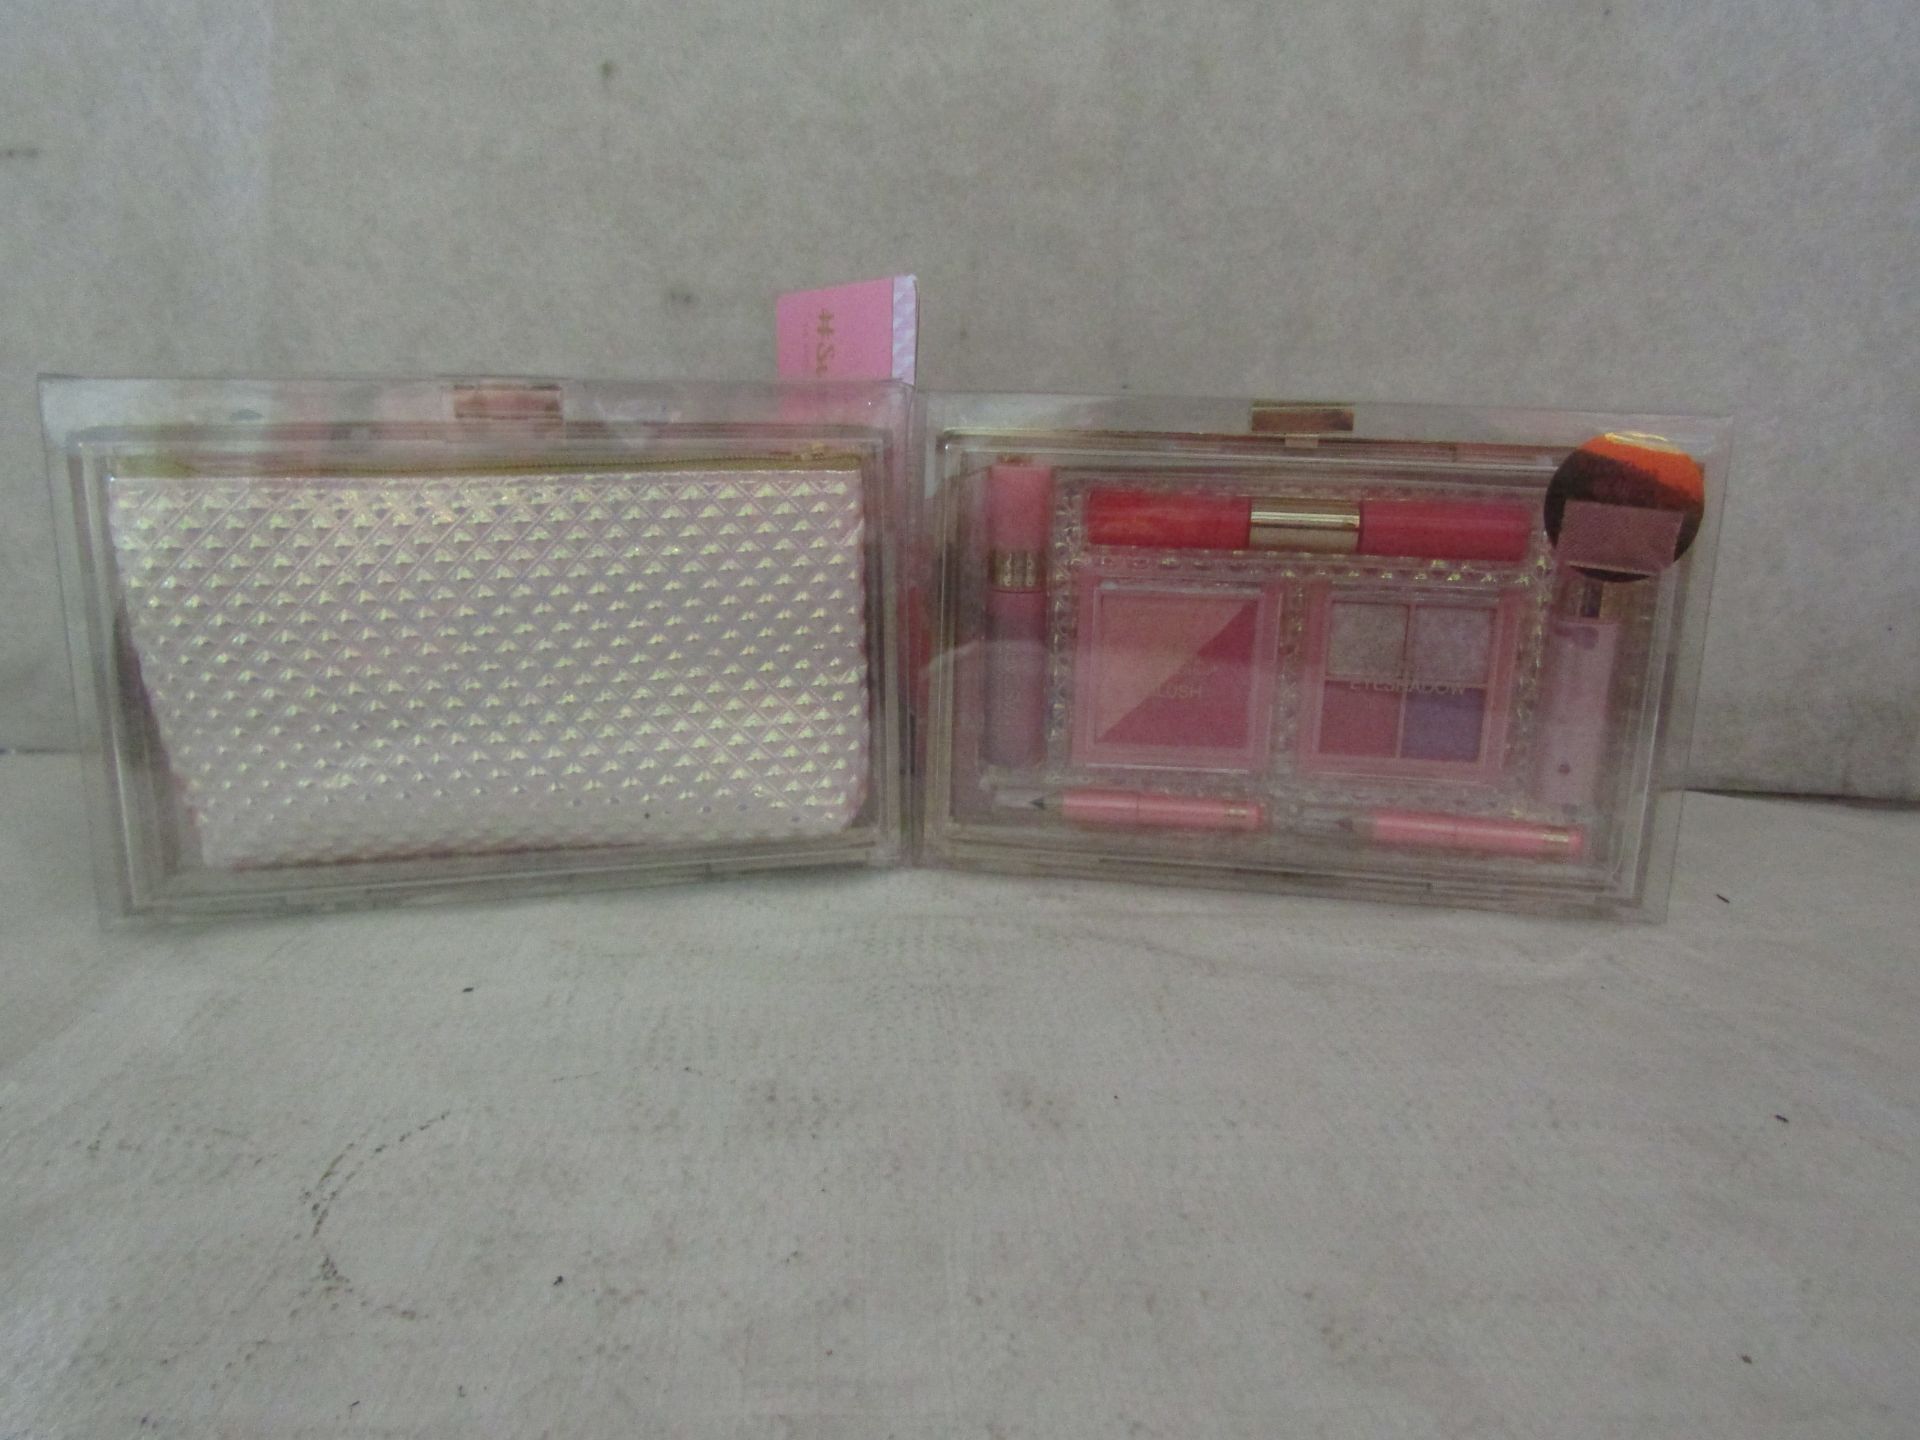 2X The Colour Workshop - Sweetheart 14-Piece Beauty Set With Clutch Bag - New & Packaged.